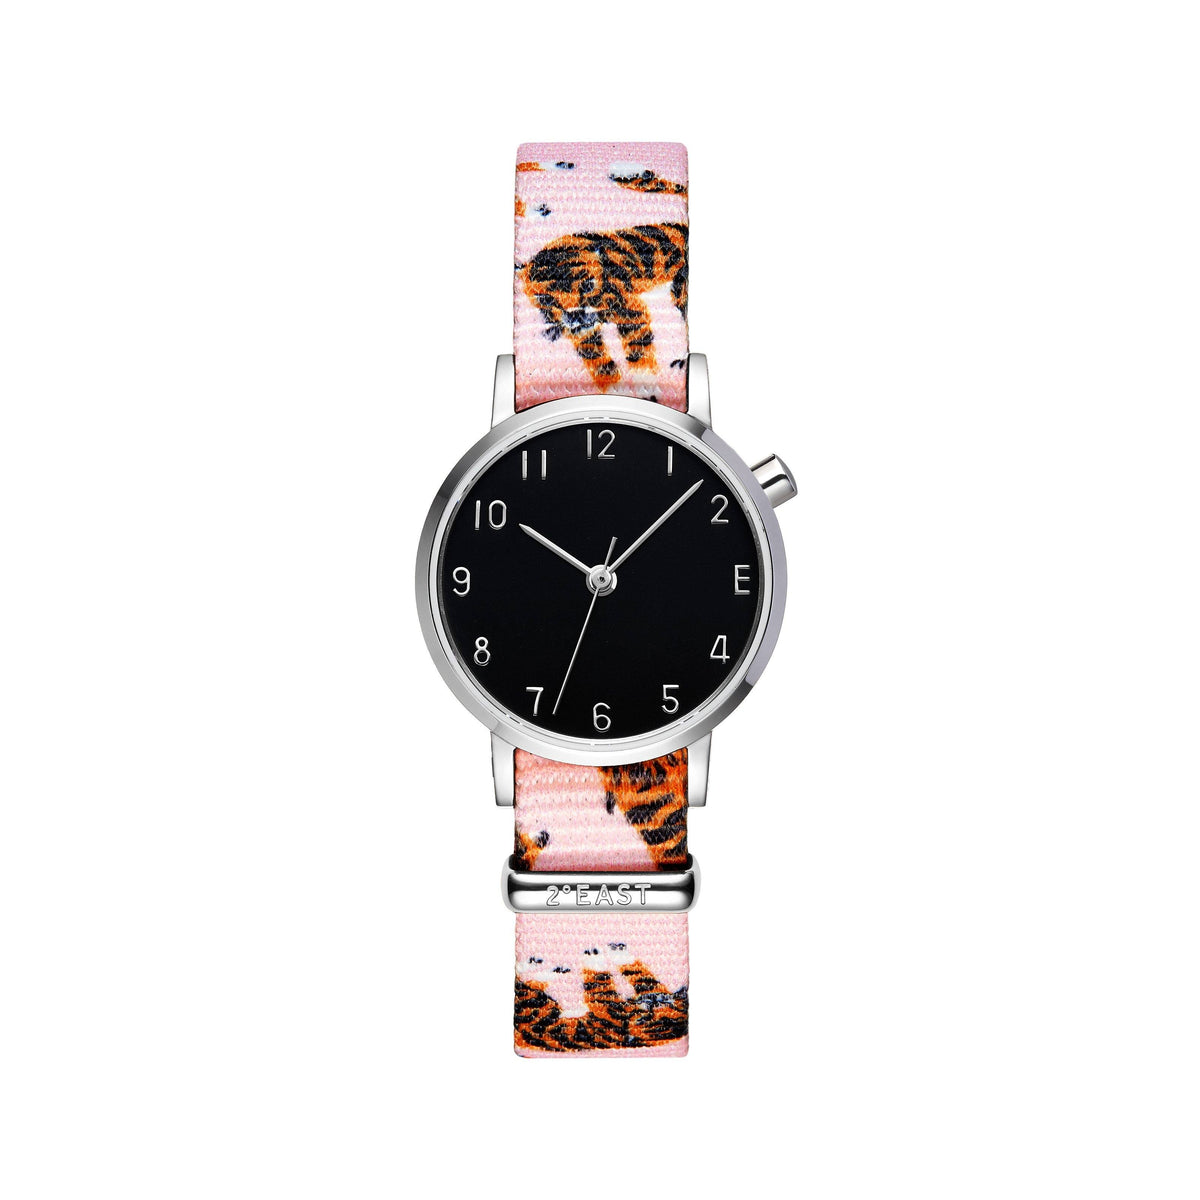 The Black and Silver Watch - Tigers (Kids)